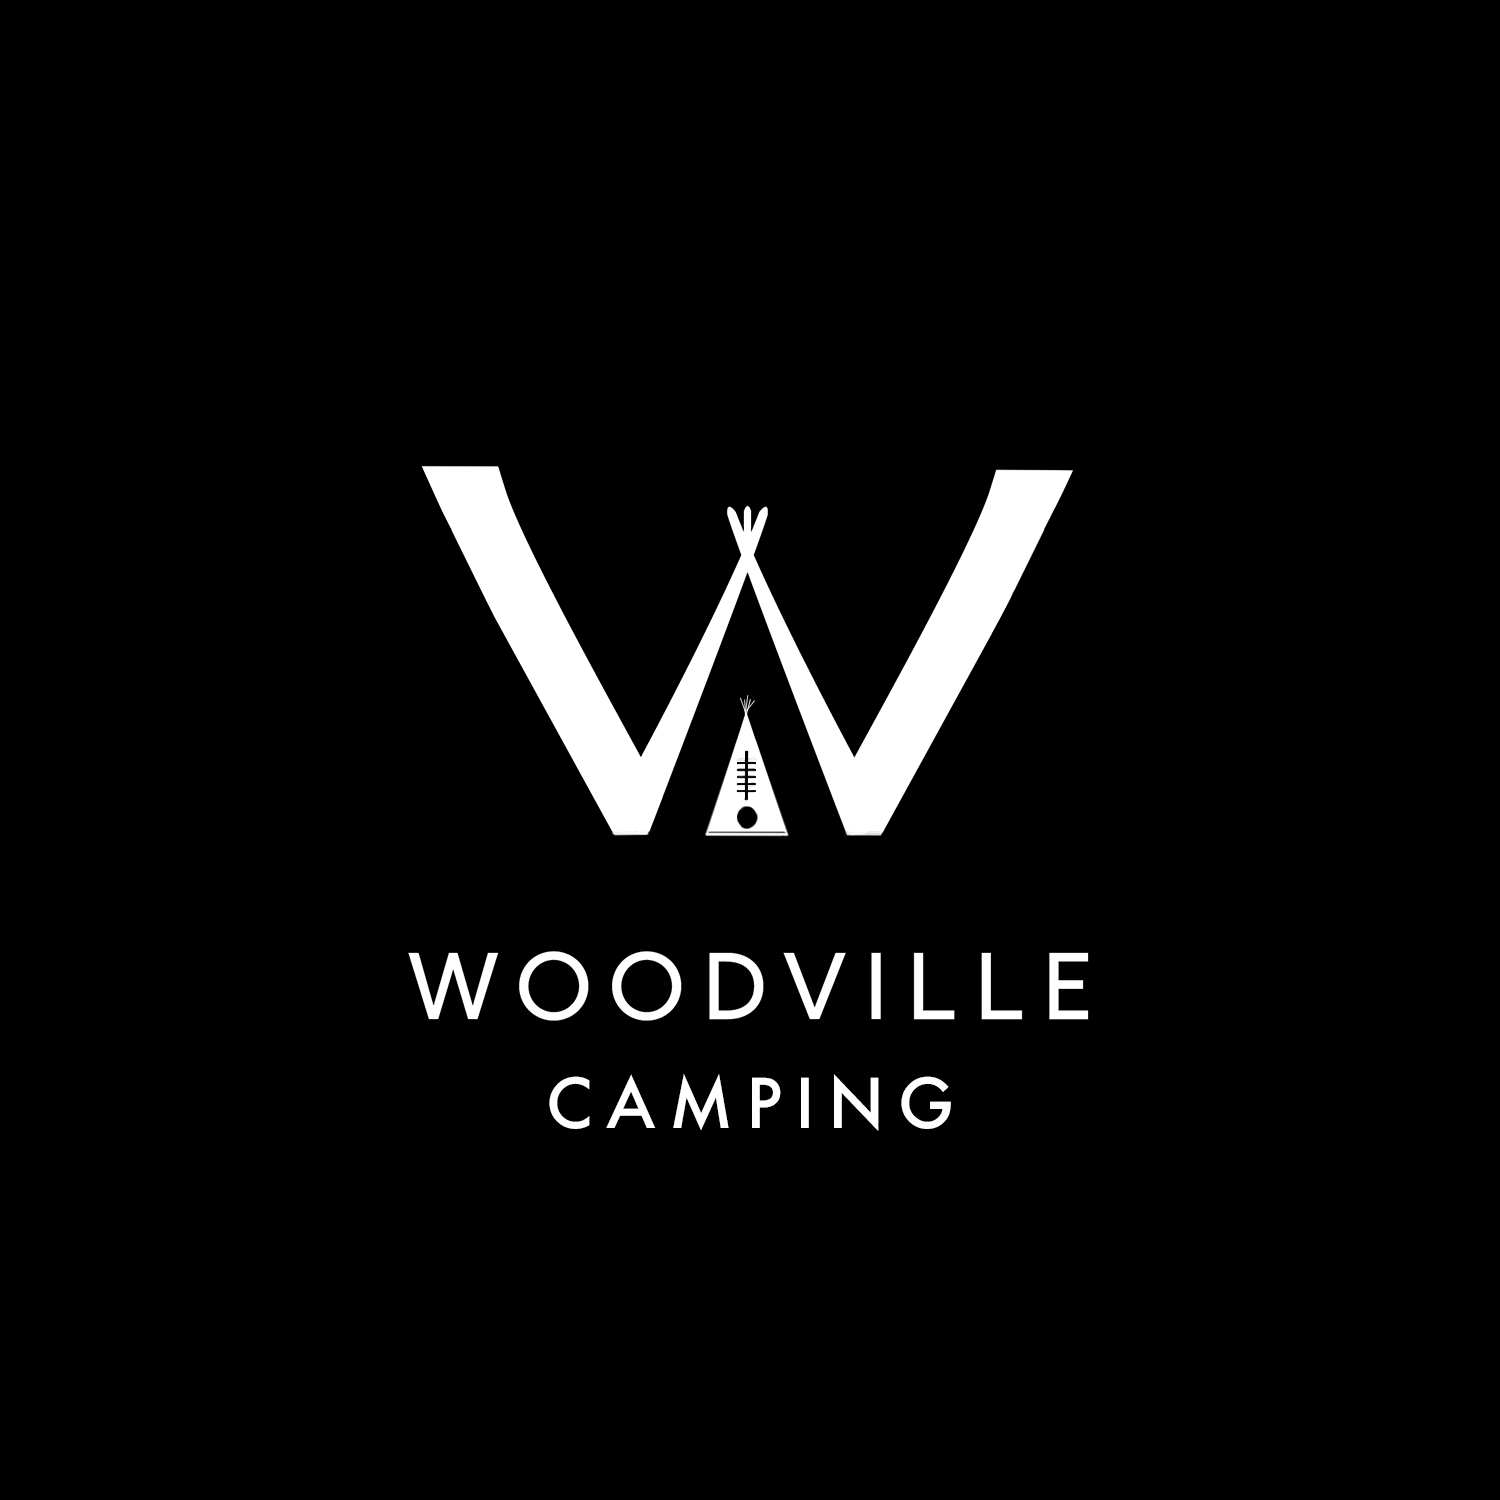 Woodville Camping